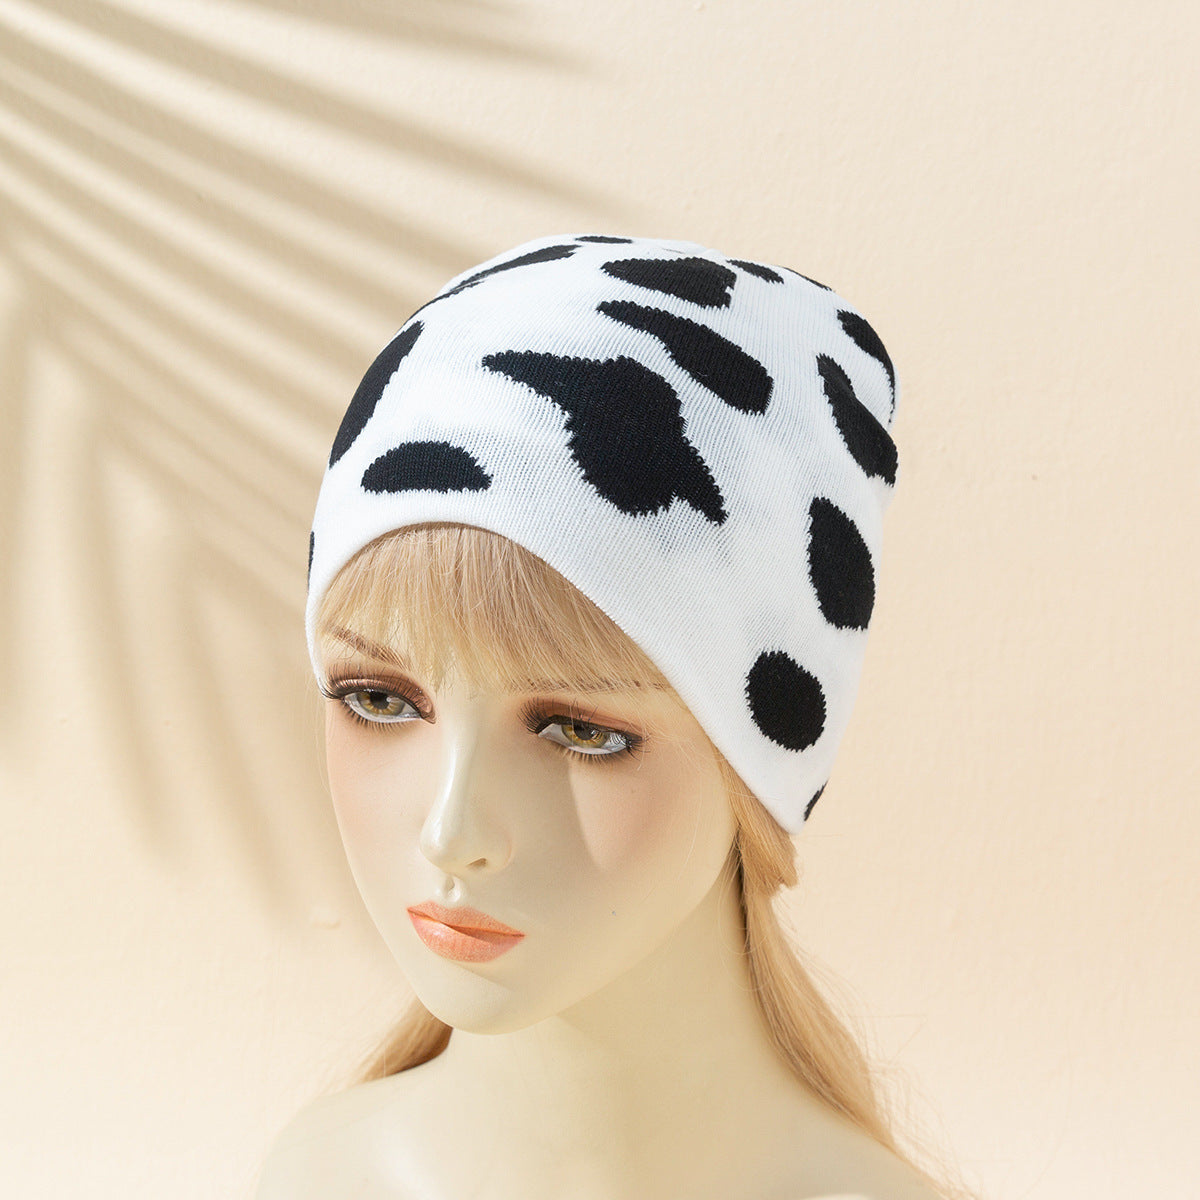 Women's Wild Casual Retro Leopard Zebra Print Cow Houndstooth Knitted Hat - Black And White Cows Pattern M - Women's Hats & Caps - Carvan Mart